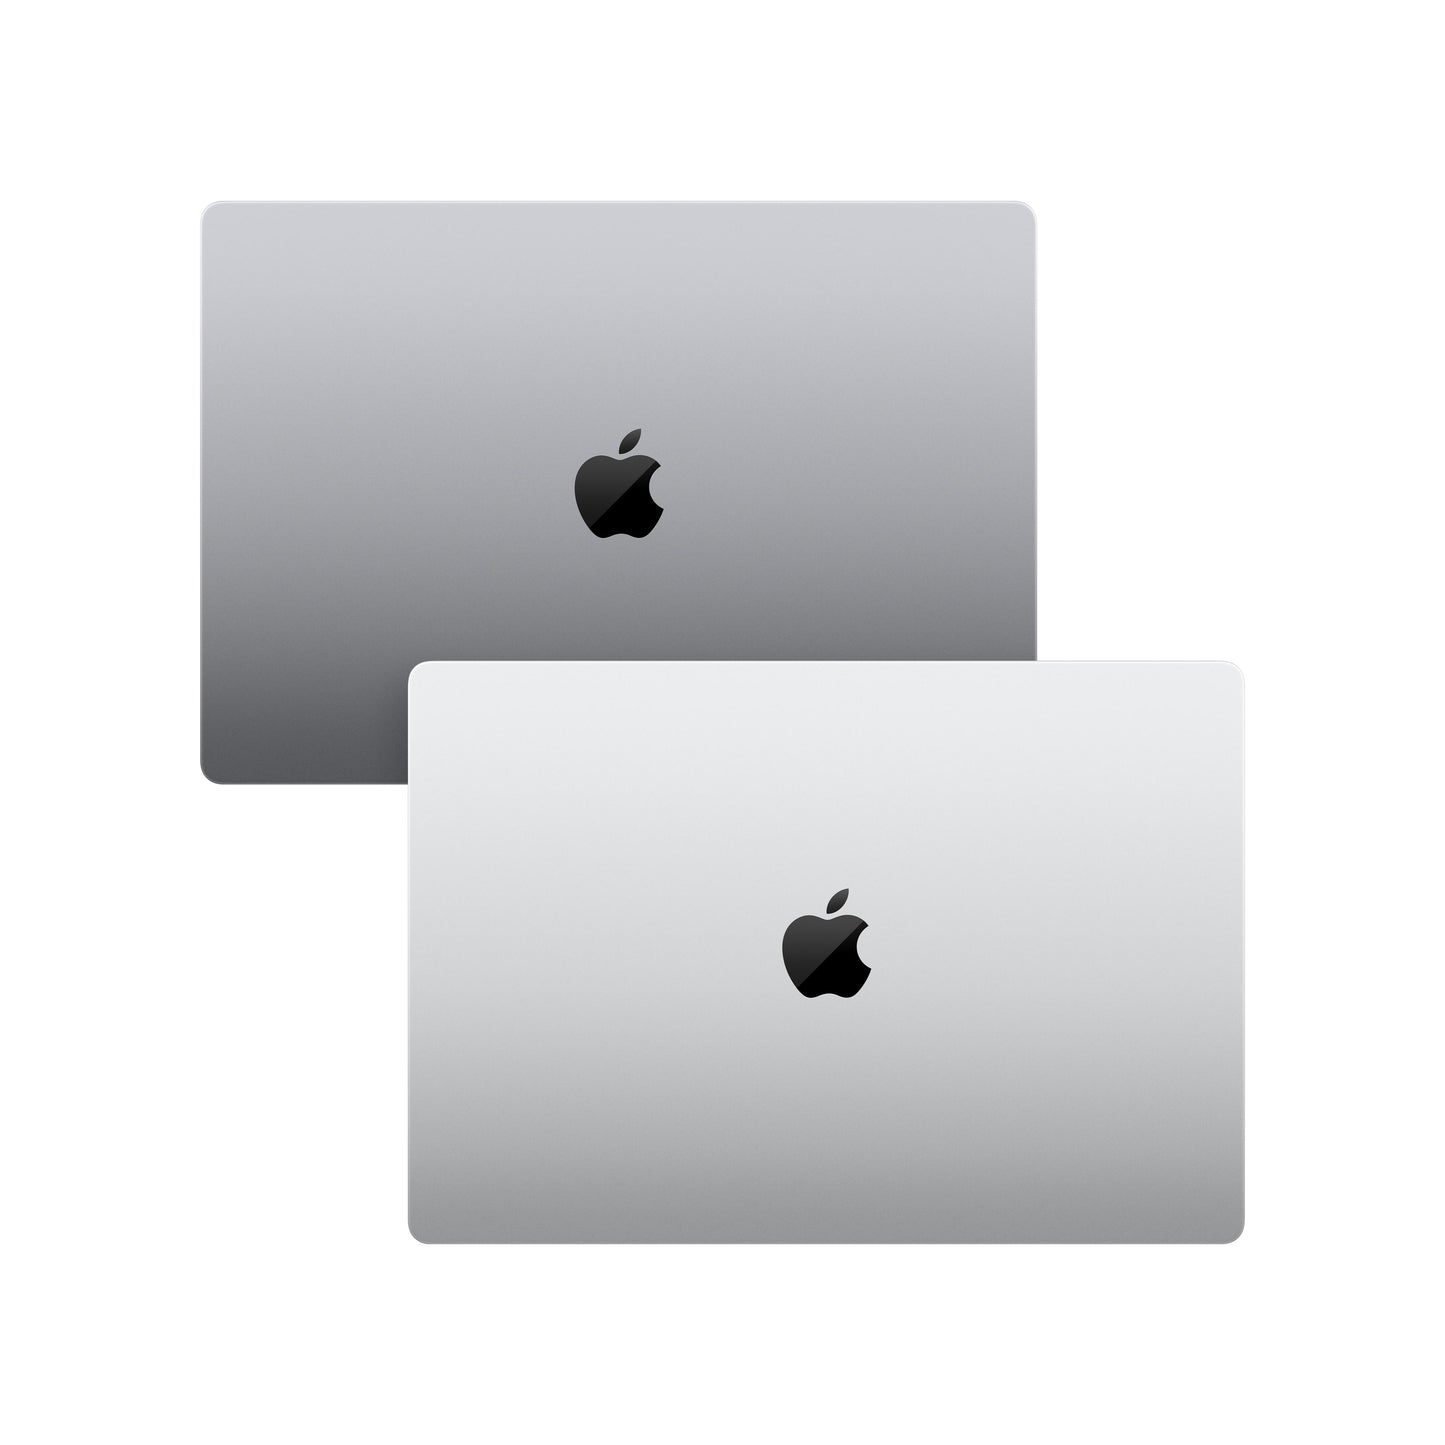 14-inch MacBook Pro: Apple M1 Pro chip with 10_core CPU and 16_core GPU 1TB SSD - Space Grey